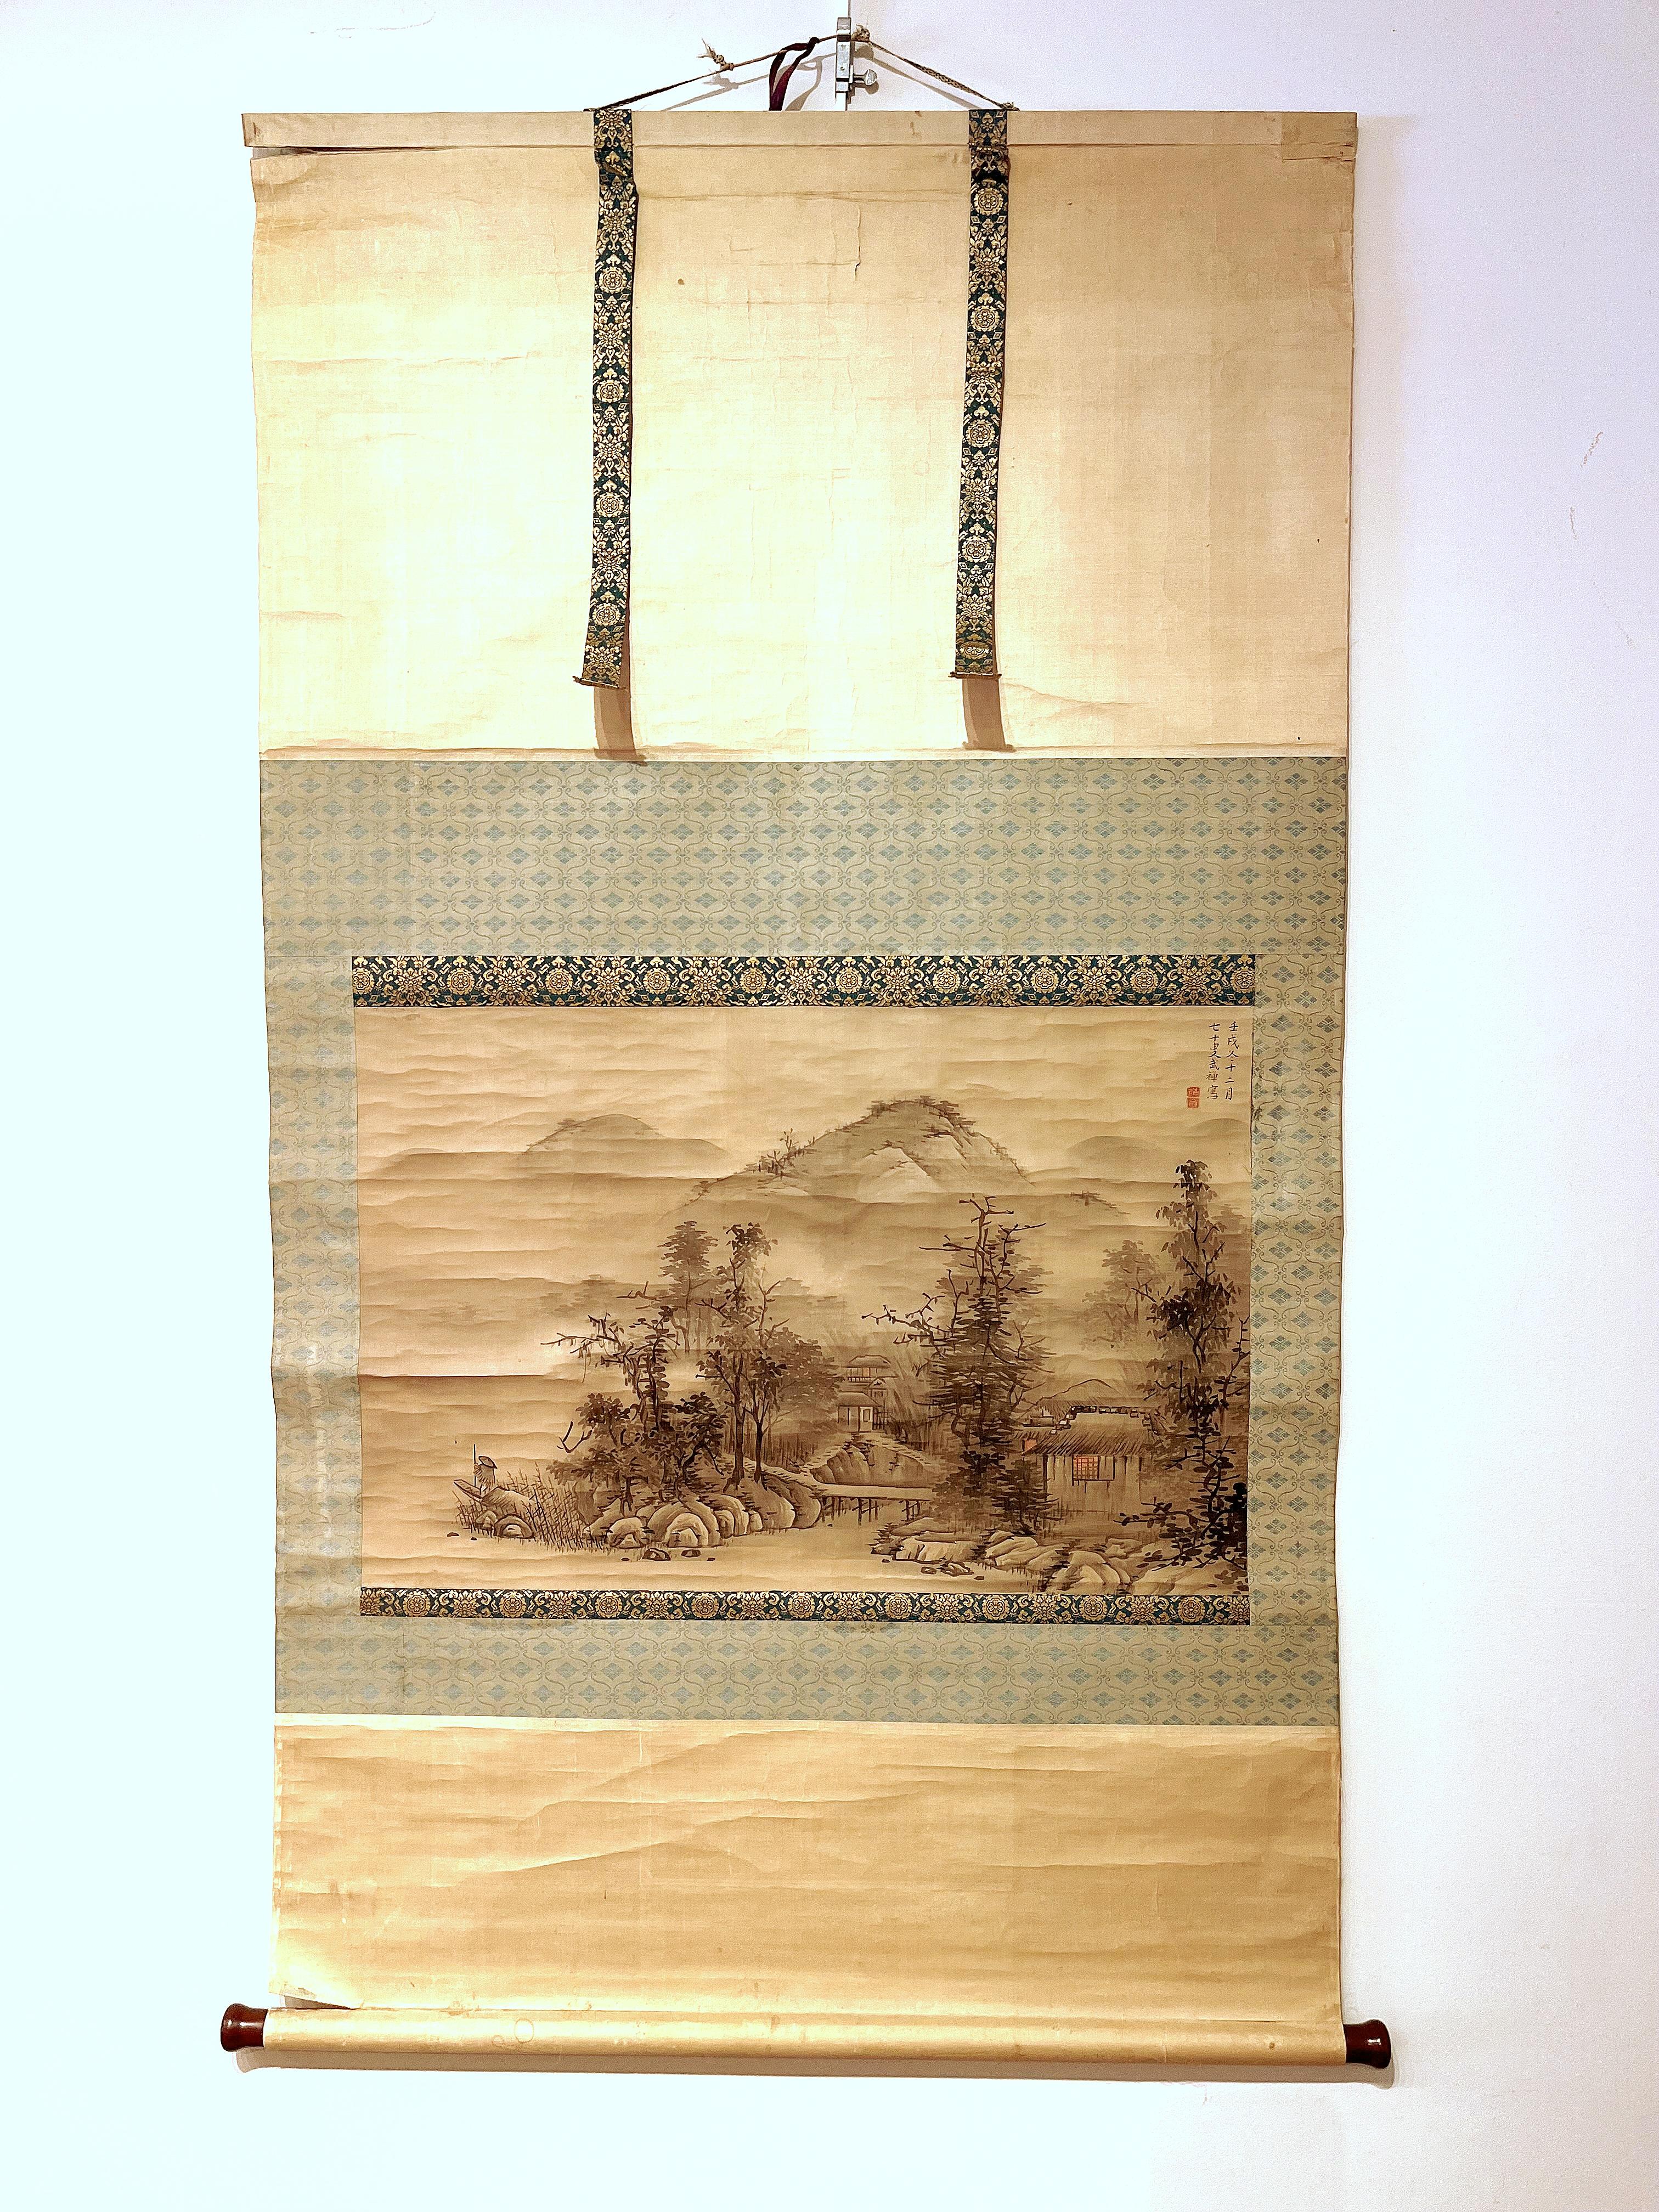 Japanese scroll painting of landscape painting depicted  village along the riverside in the mountains with fisherman
Ink and color on silk
Overall size:   53